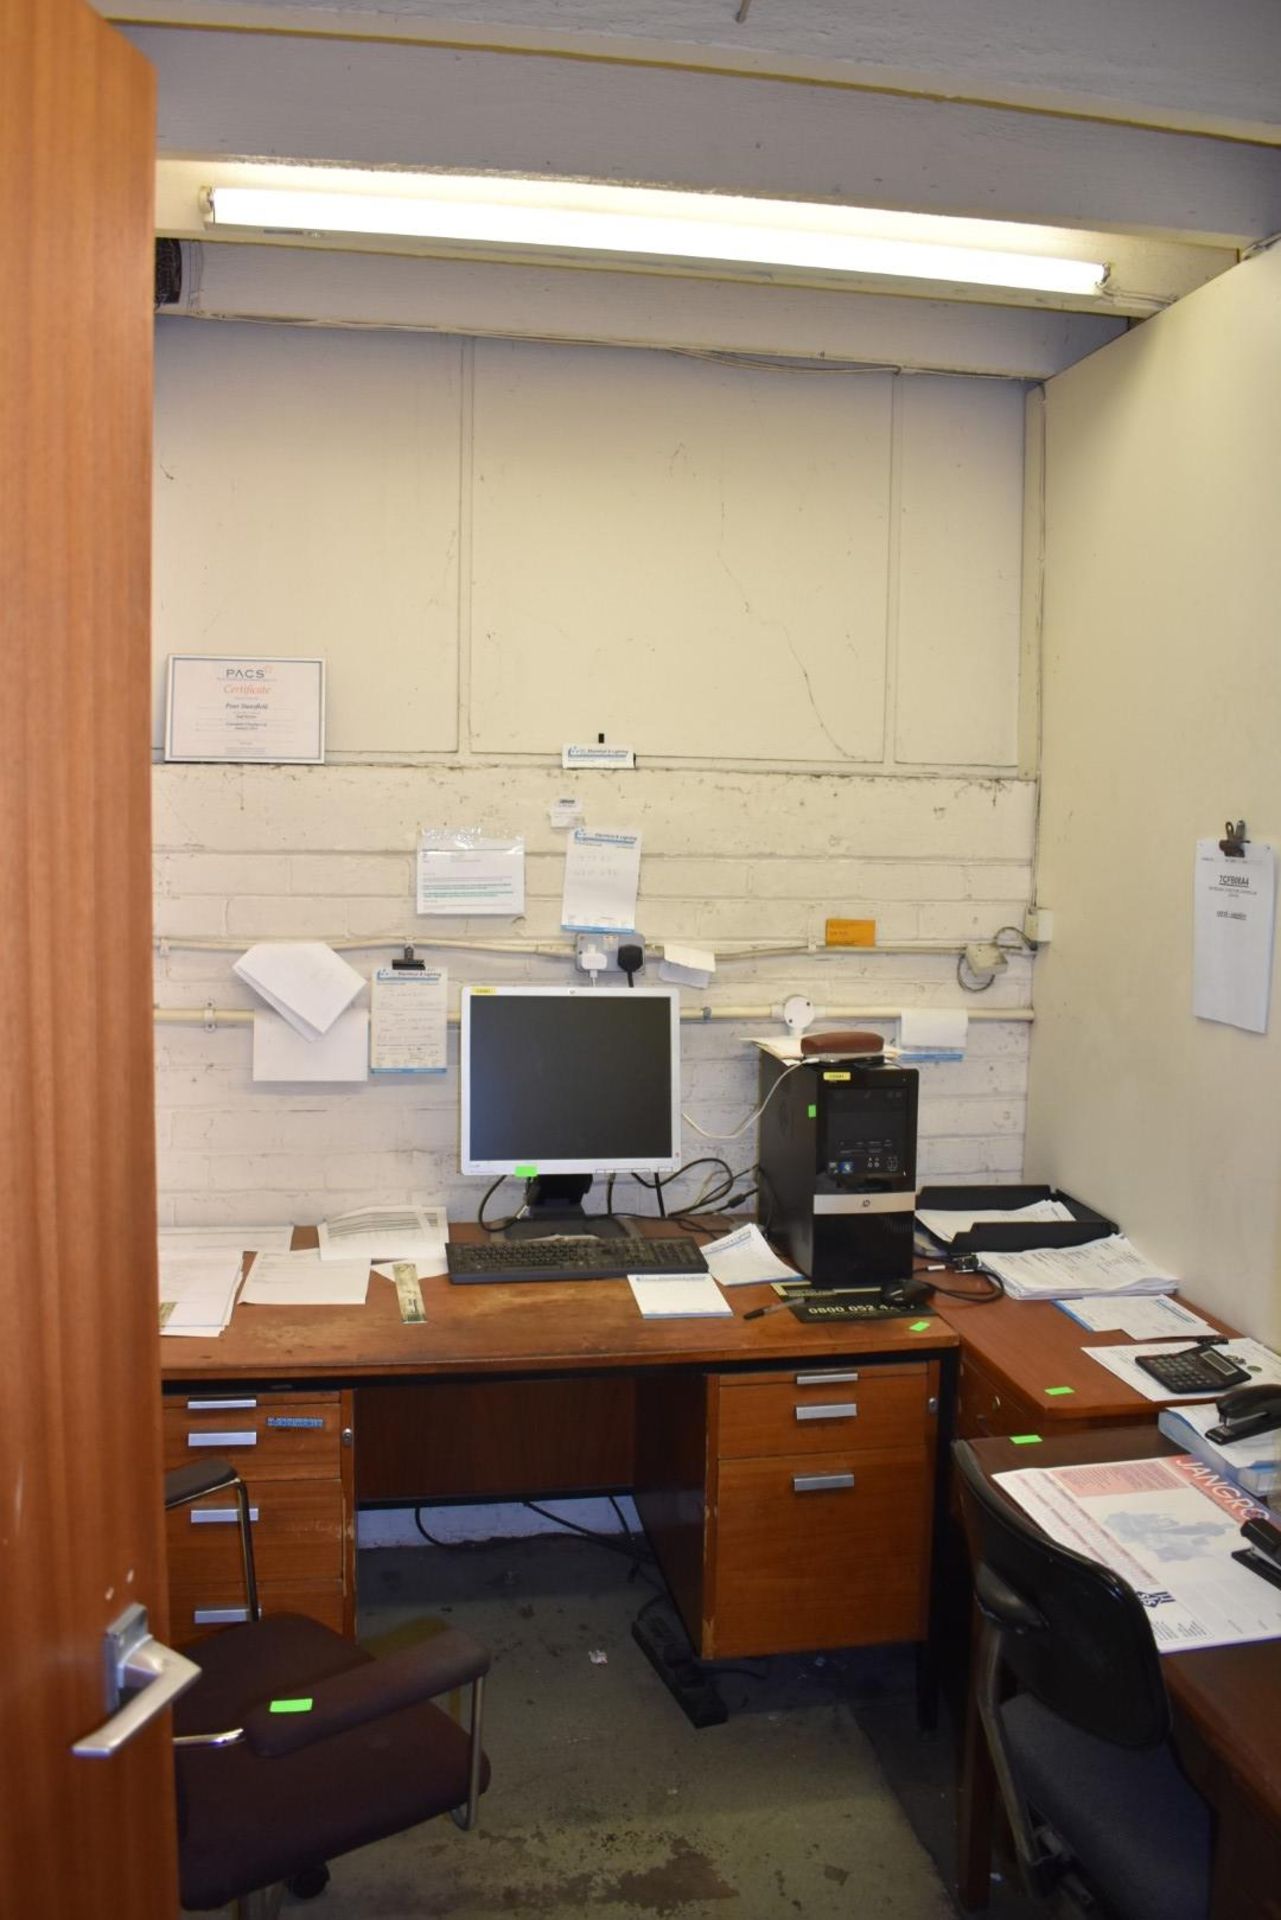 1 x Assorted Lot of Office Furniture - Includes Two Desks, 1 x Table, 1 x Filing Cabinet and 2 x